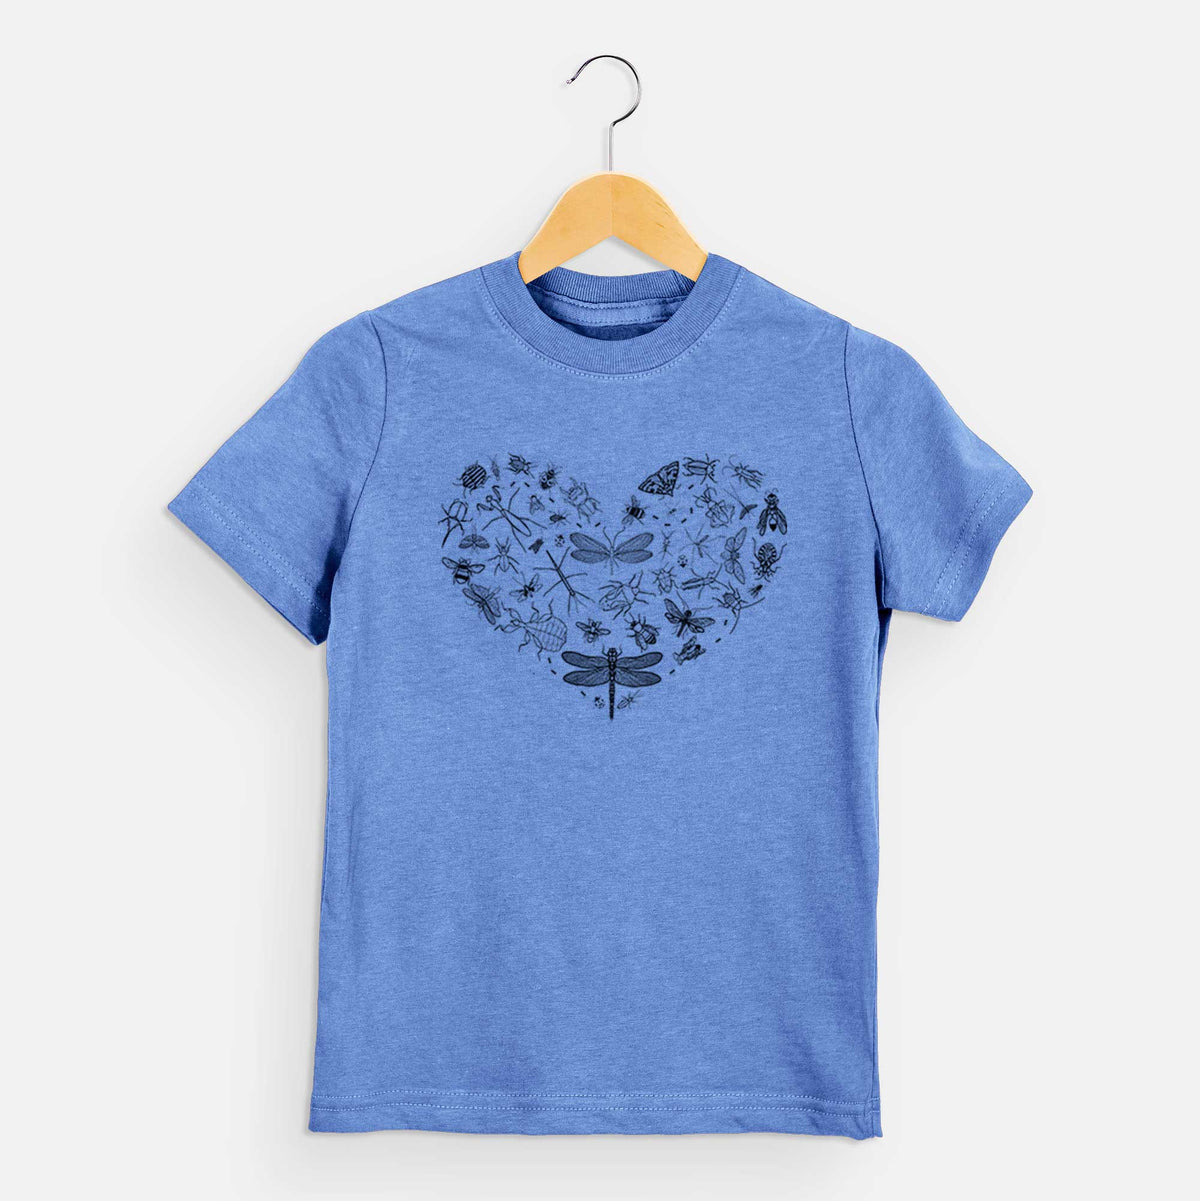 Heart Full of Insects - Kids Shirt